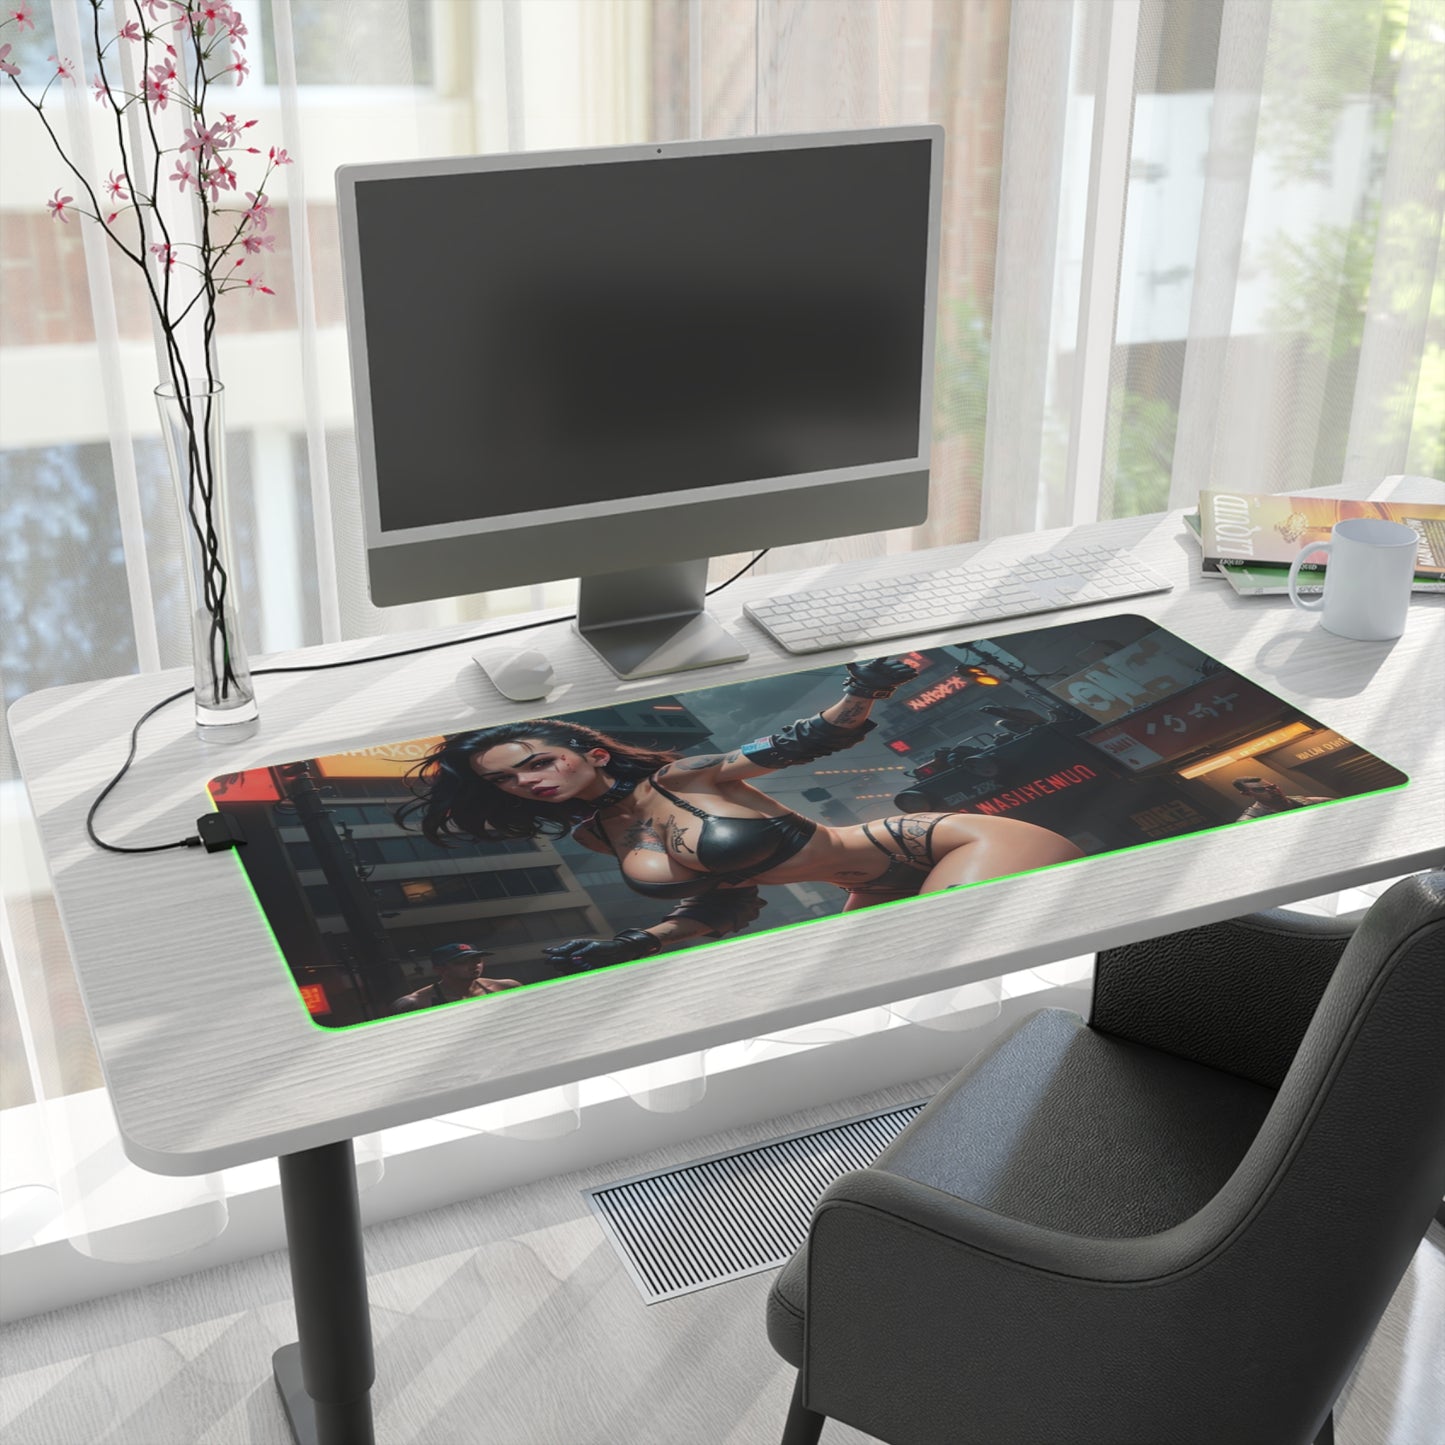 Dystopian beauty-12 LED Gaming Mouse Pad